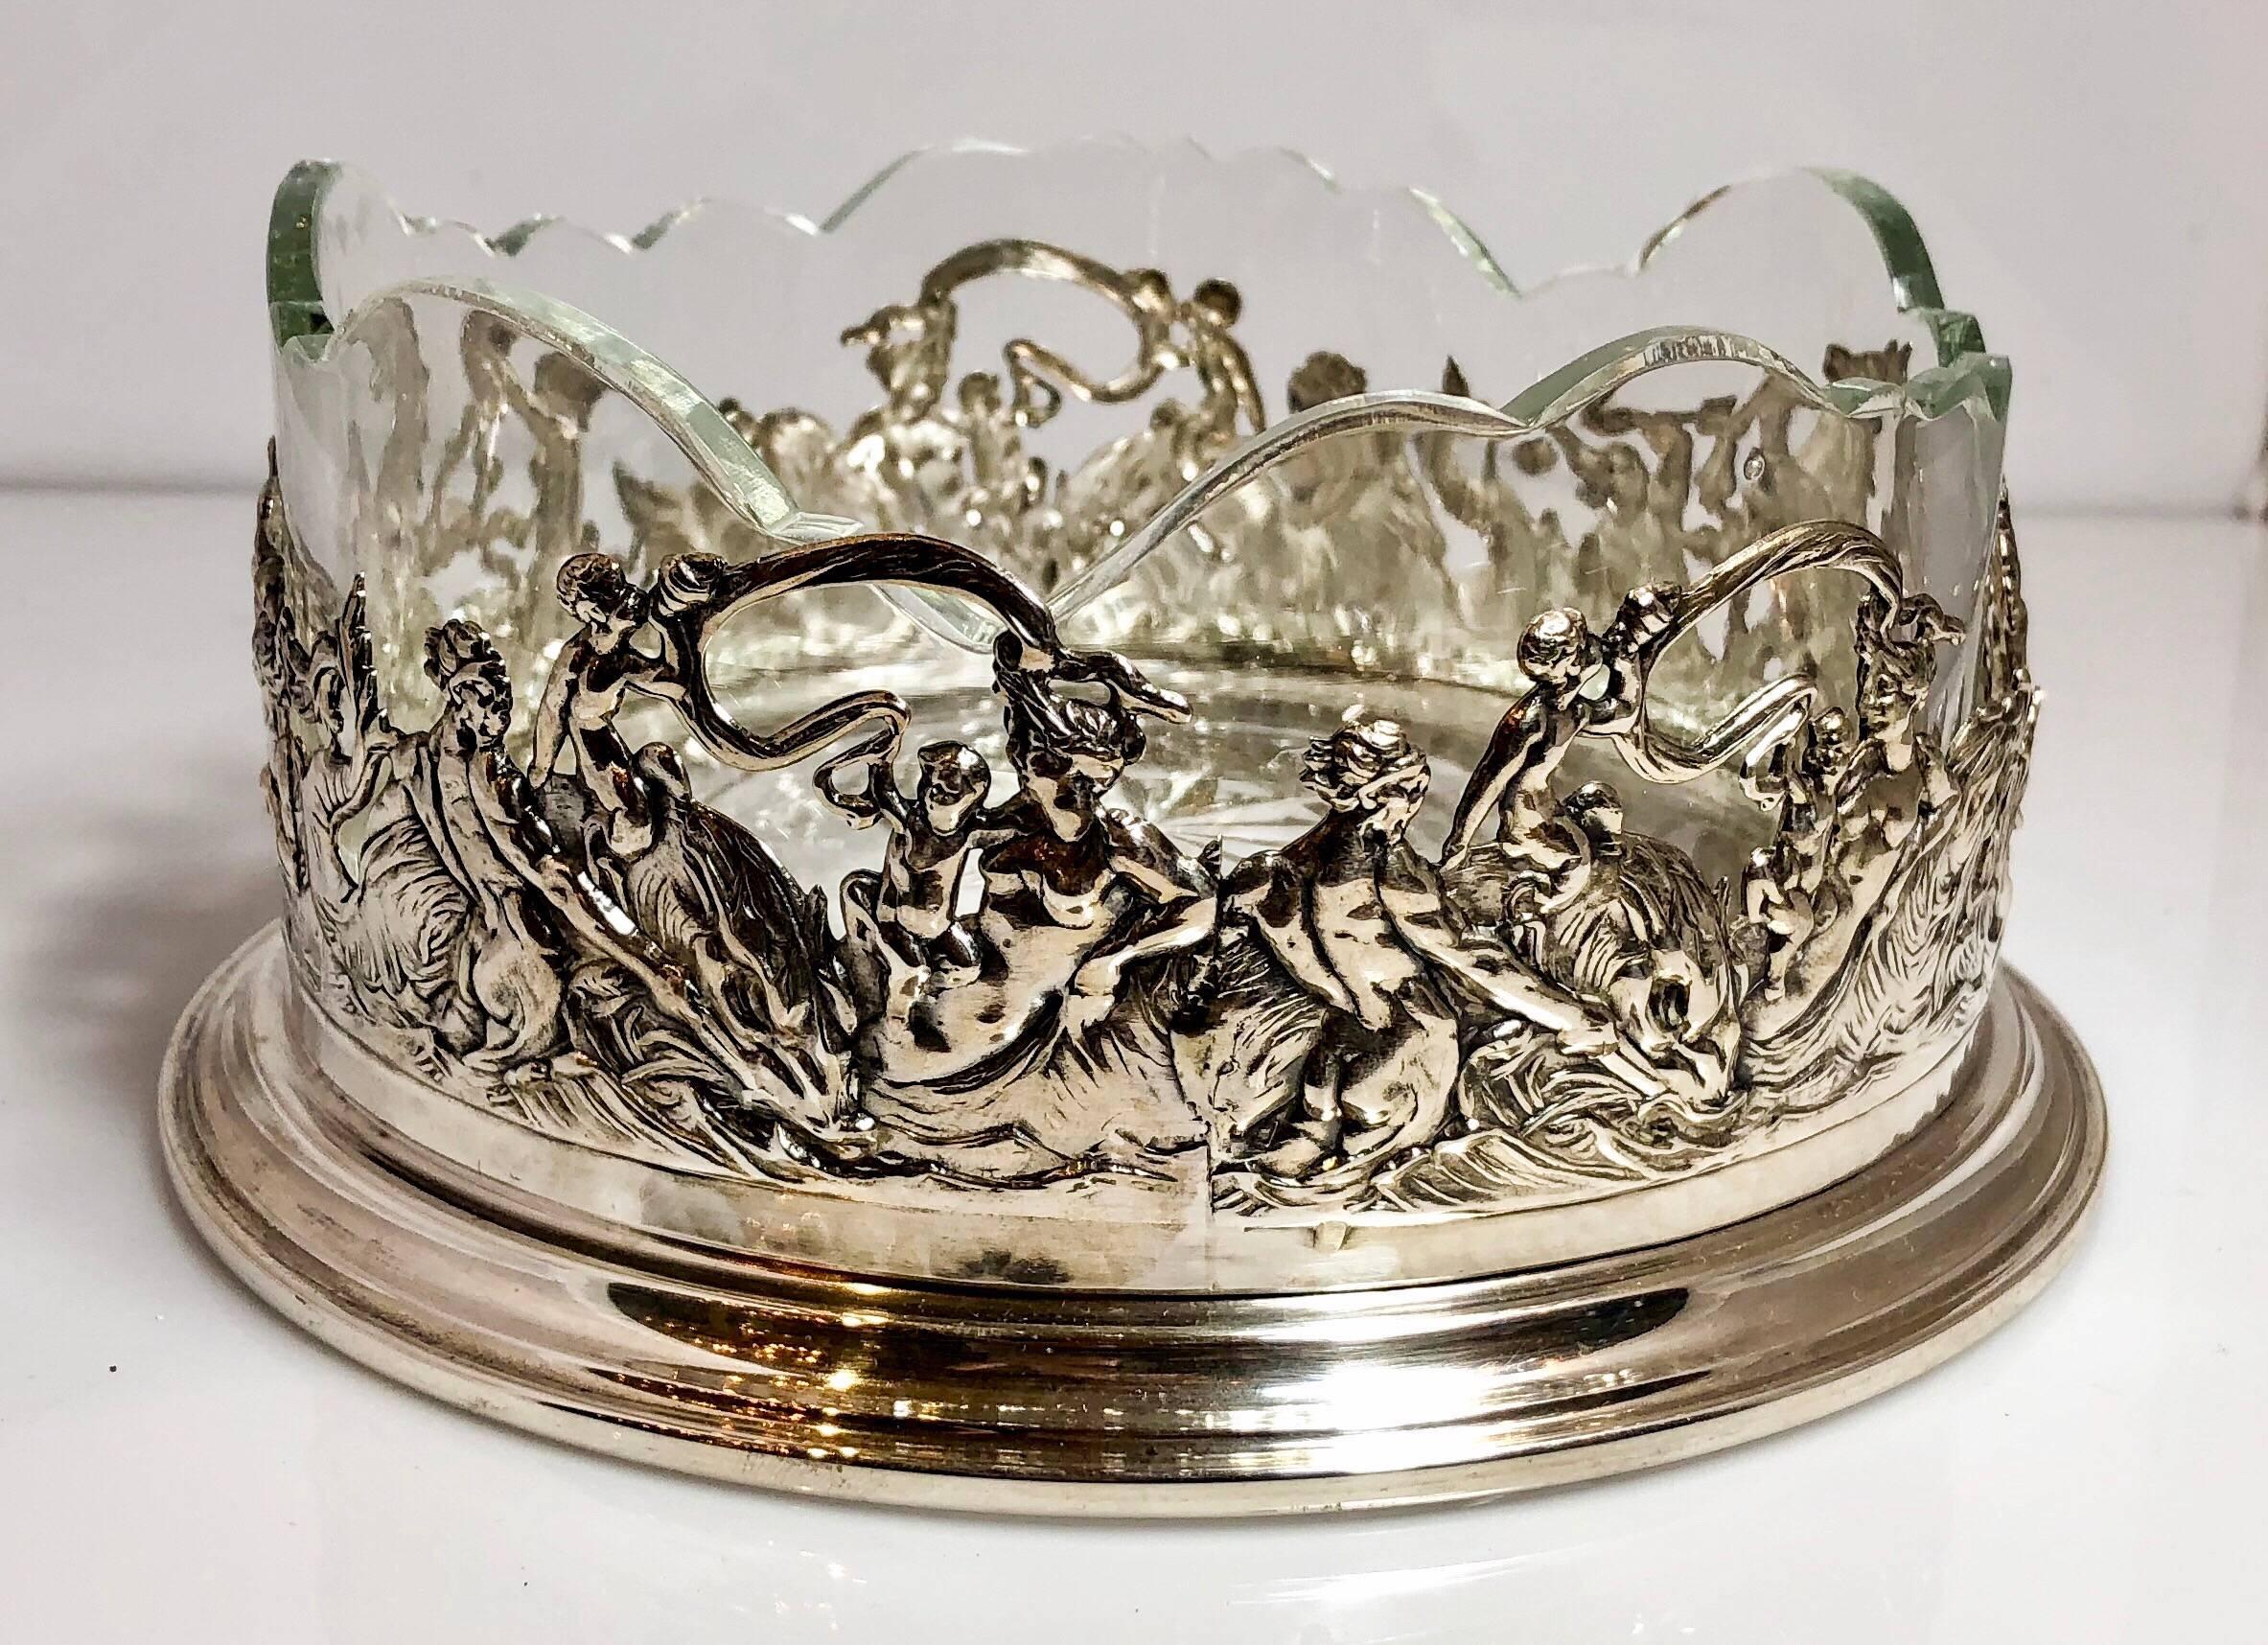 Antique Continental silver wine coaster with crystal liner, circa 1900-1910.